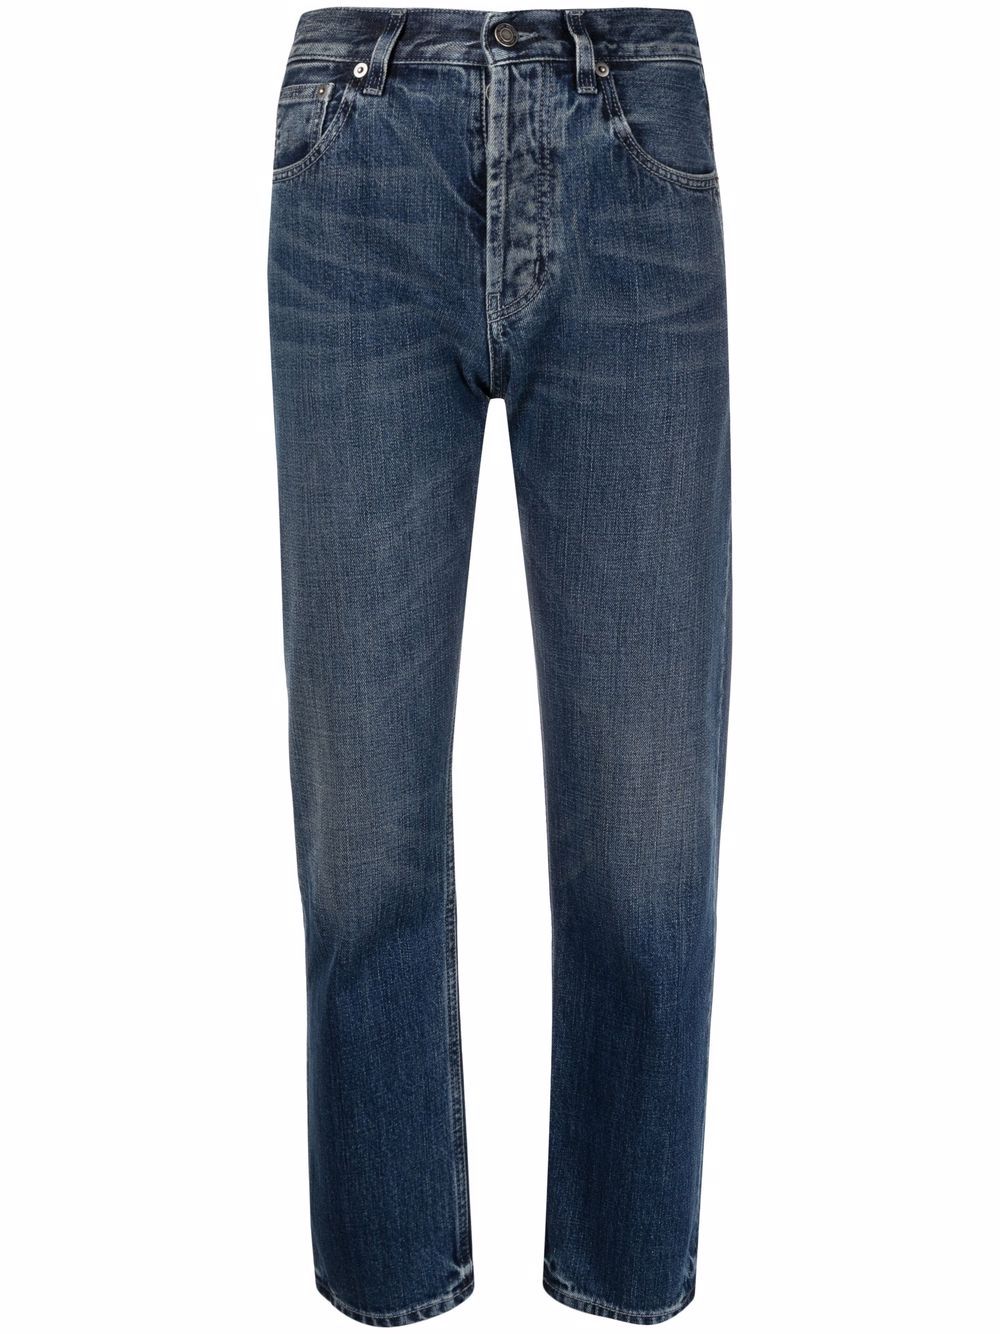 Saint Laurent high-waisted Cropped Jeans - Farfetch